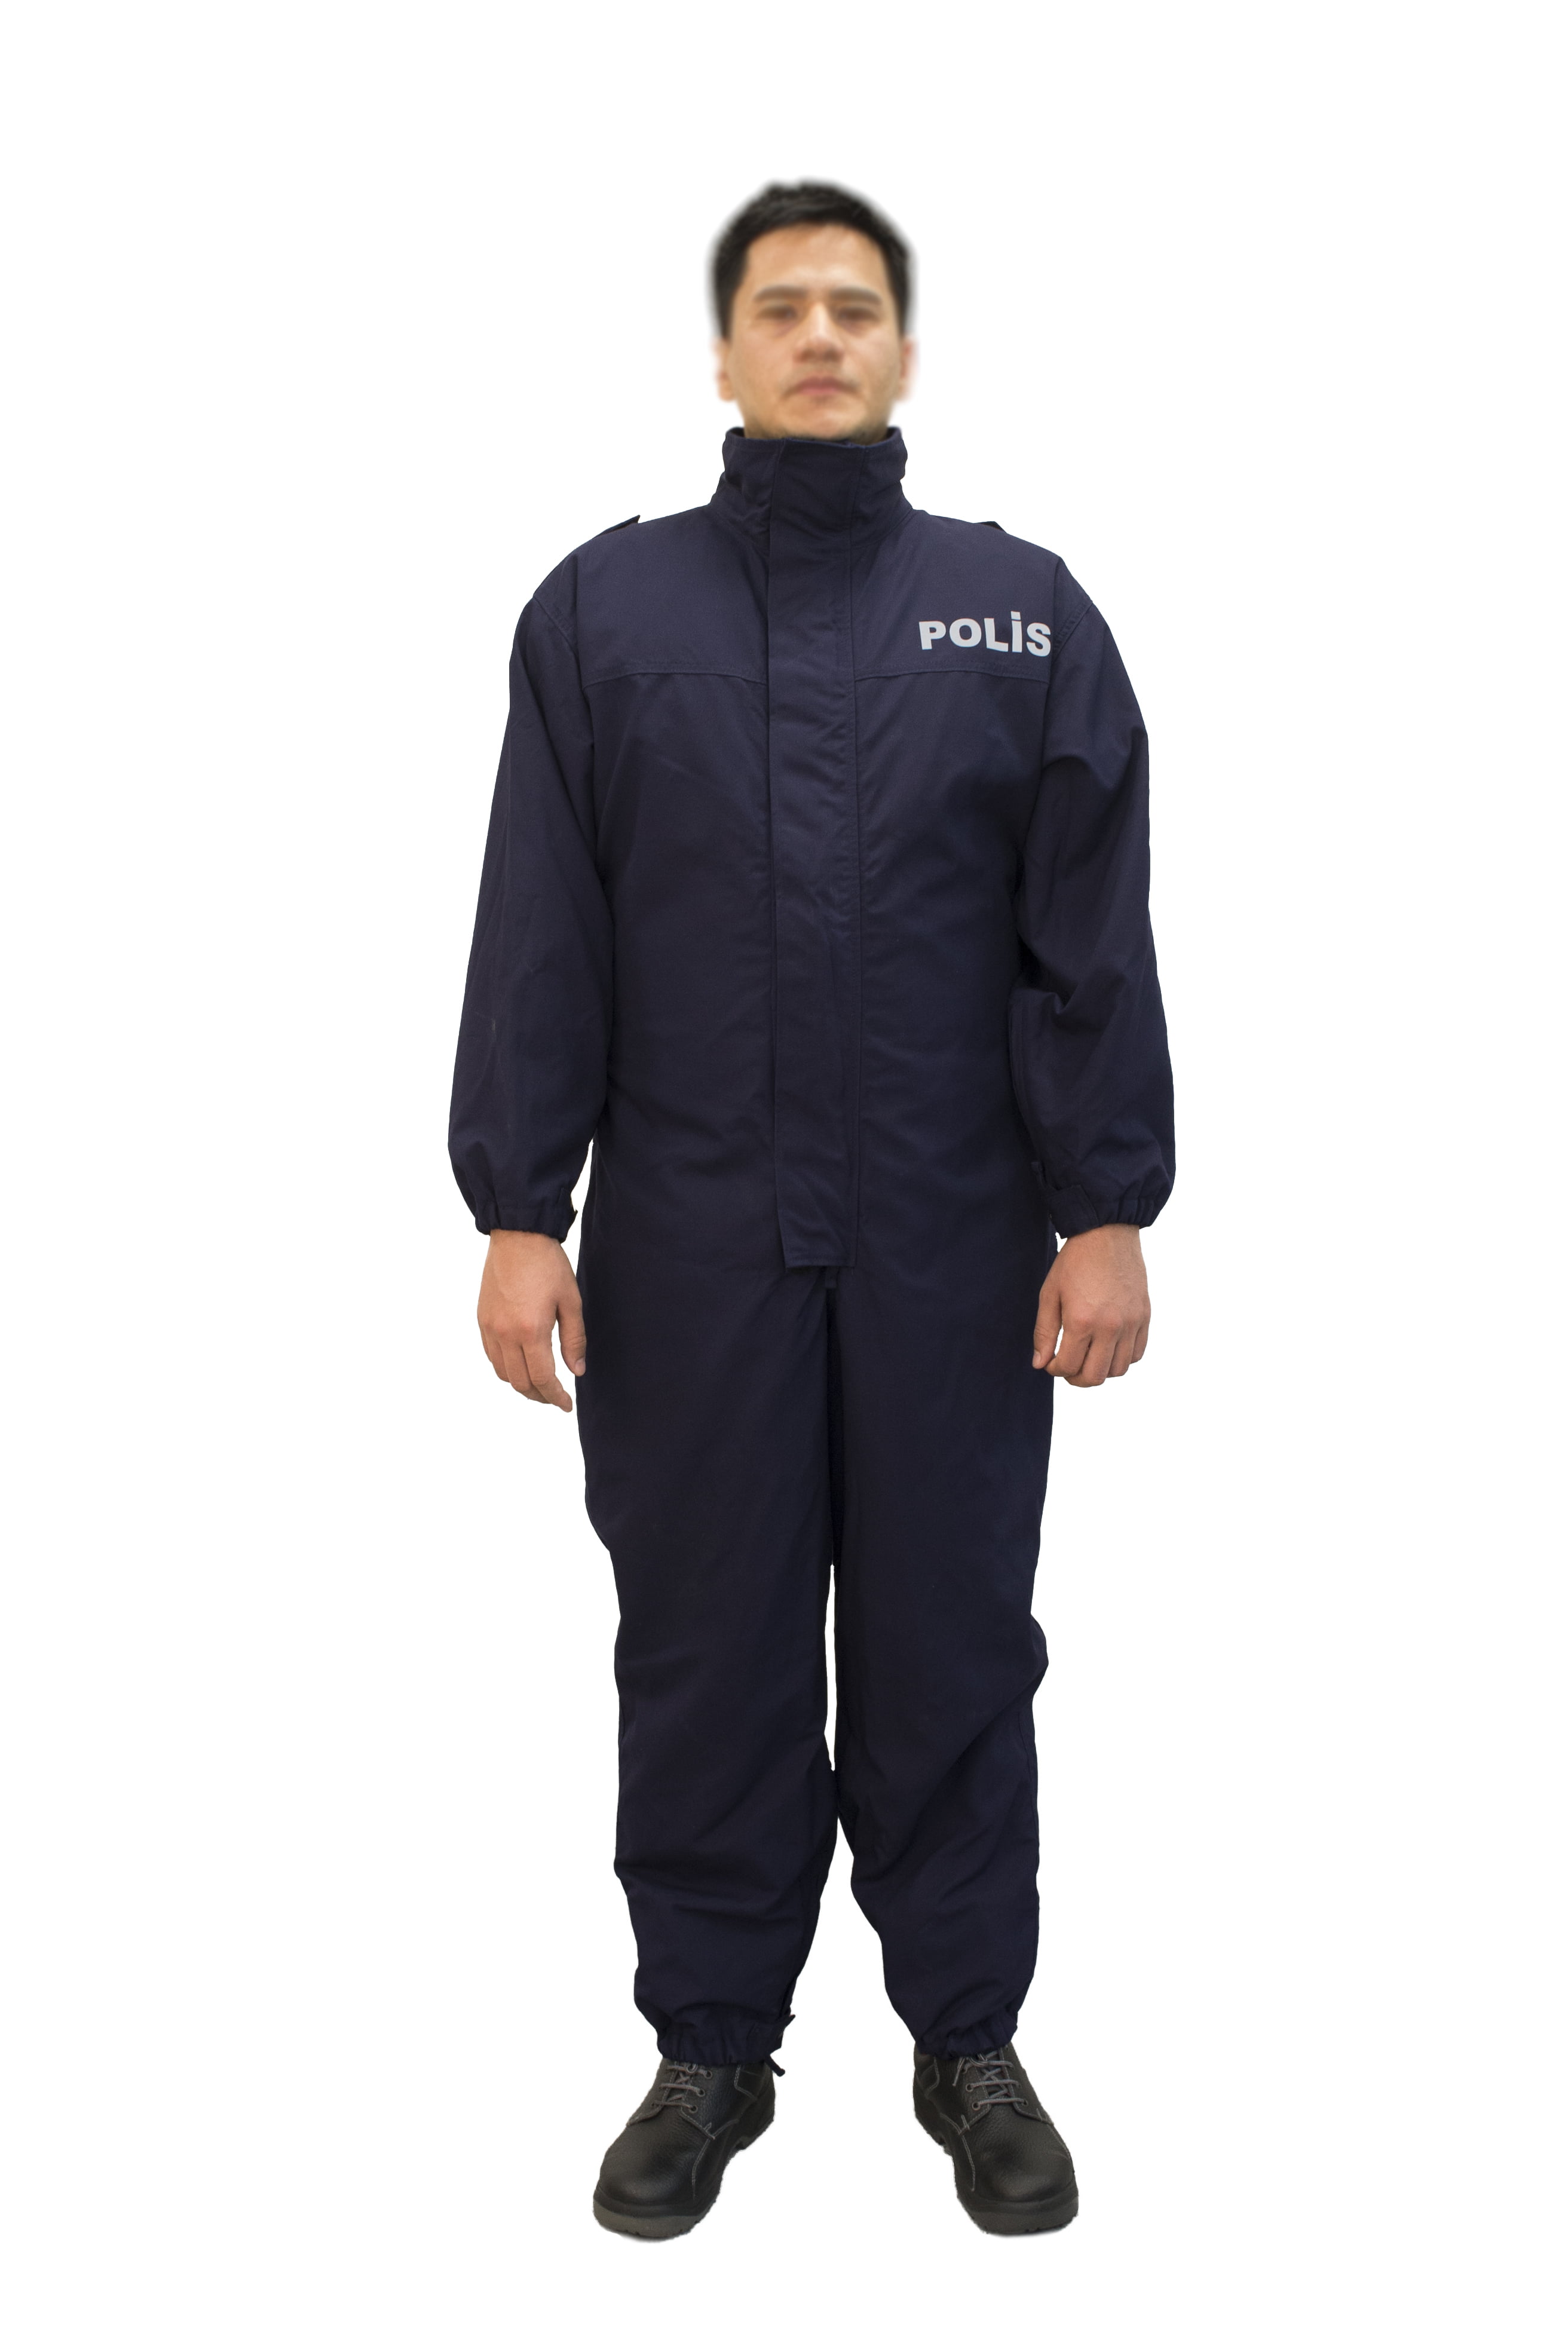 Police Coverall-Aramid